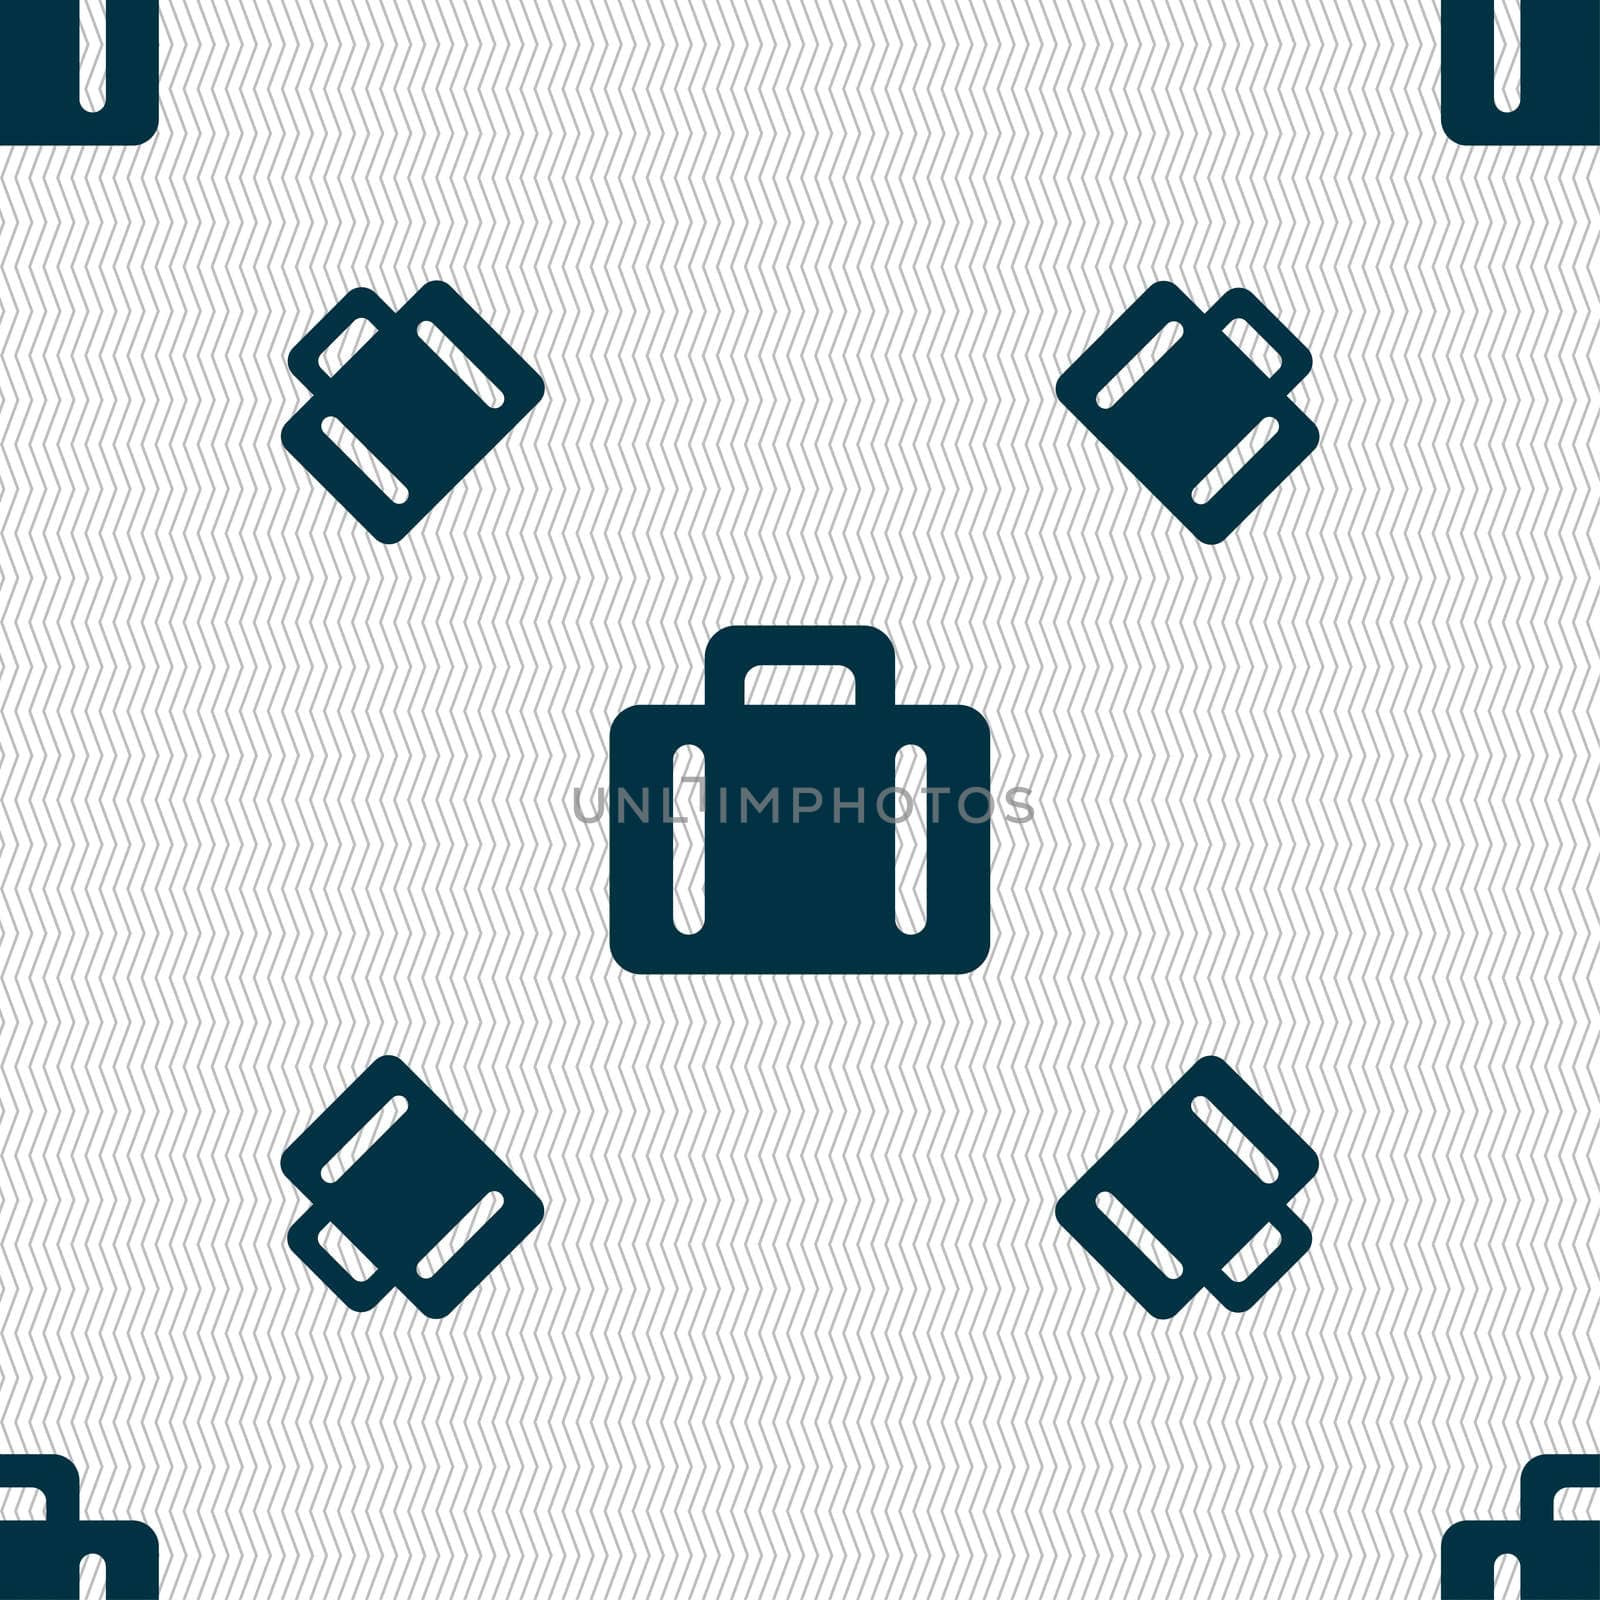 suitcase icon sign. Seamless pattern with geometric texture. illustration